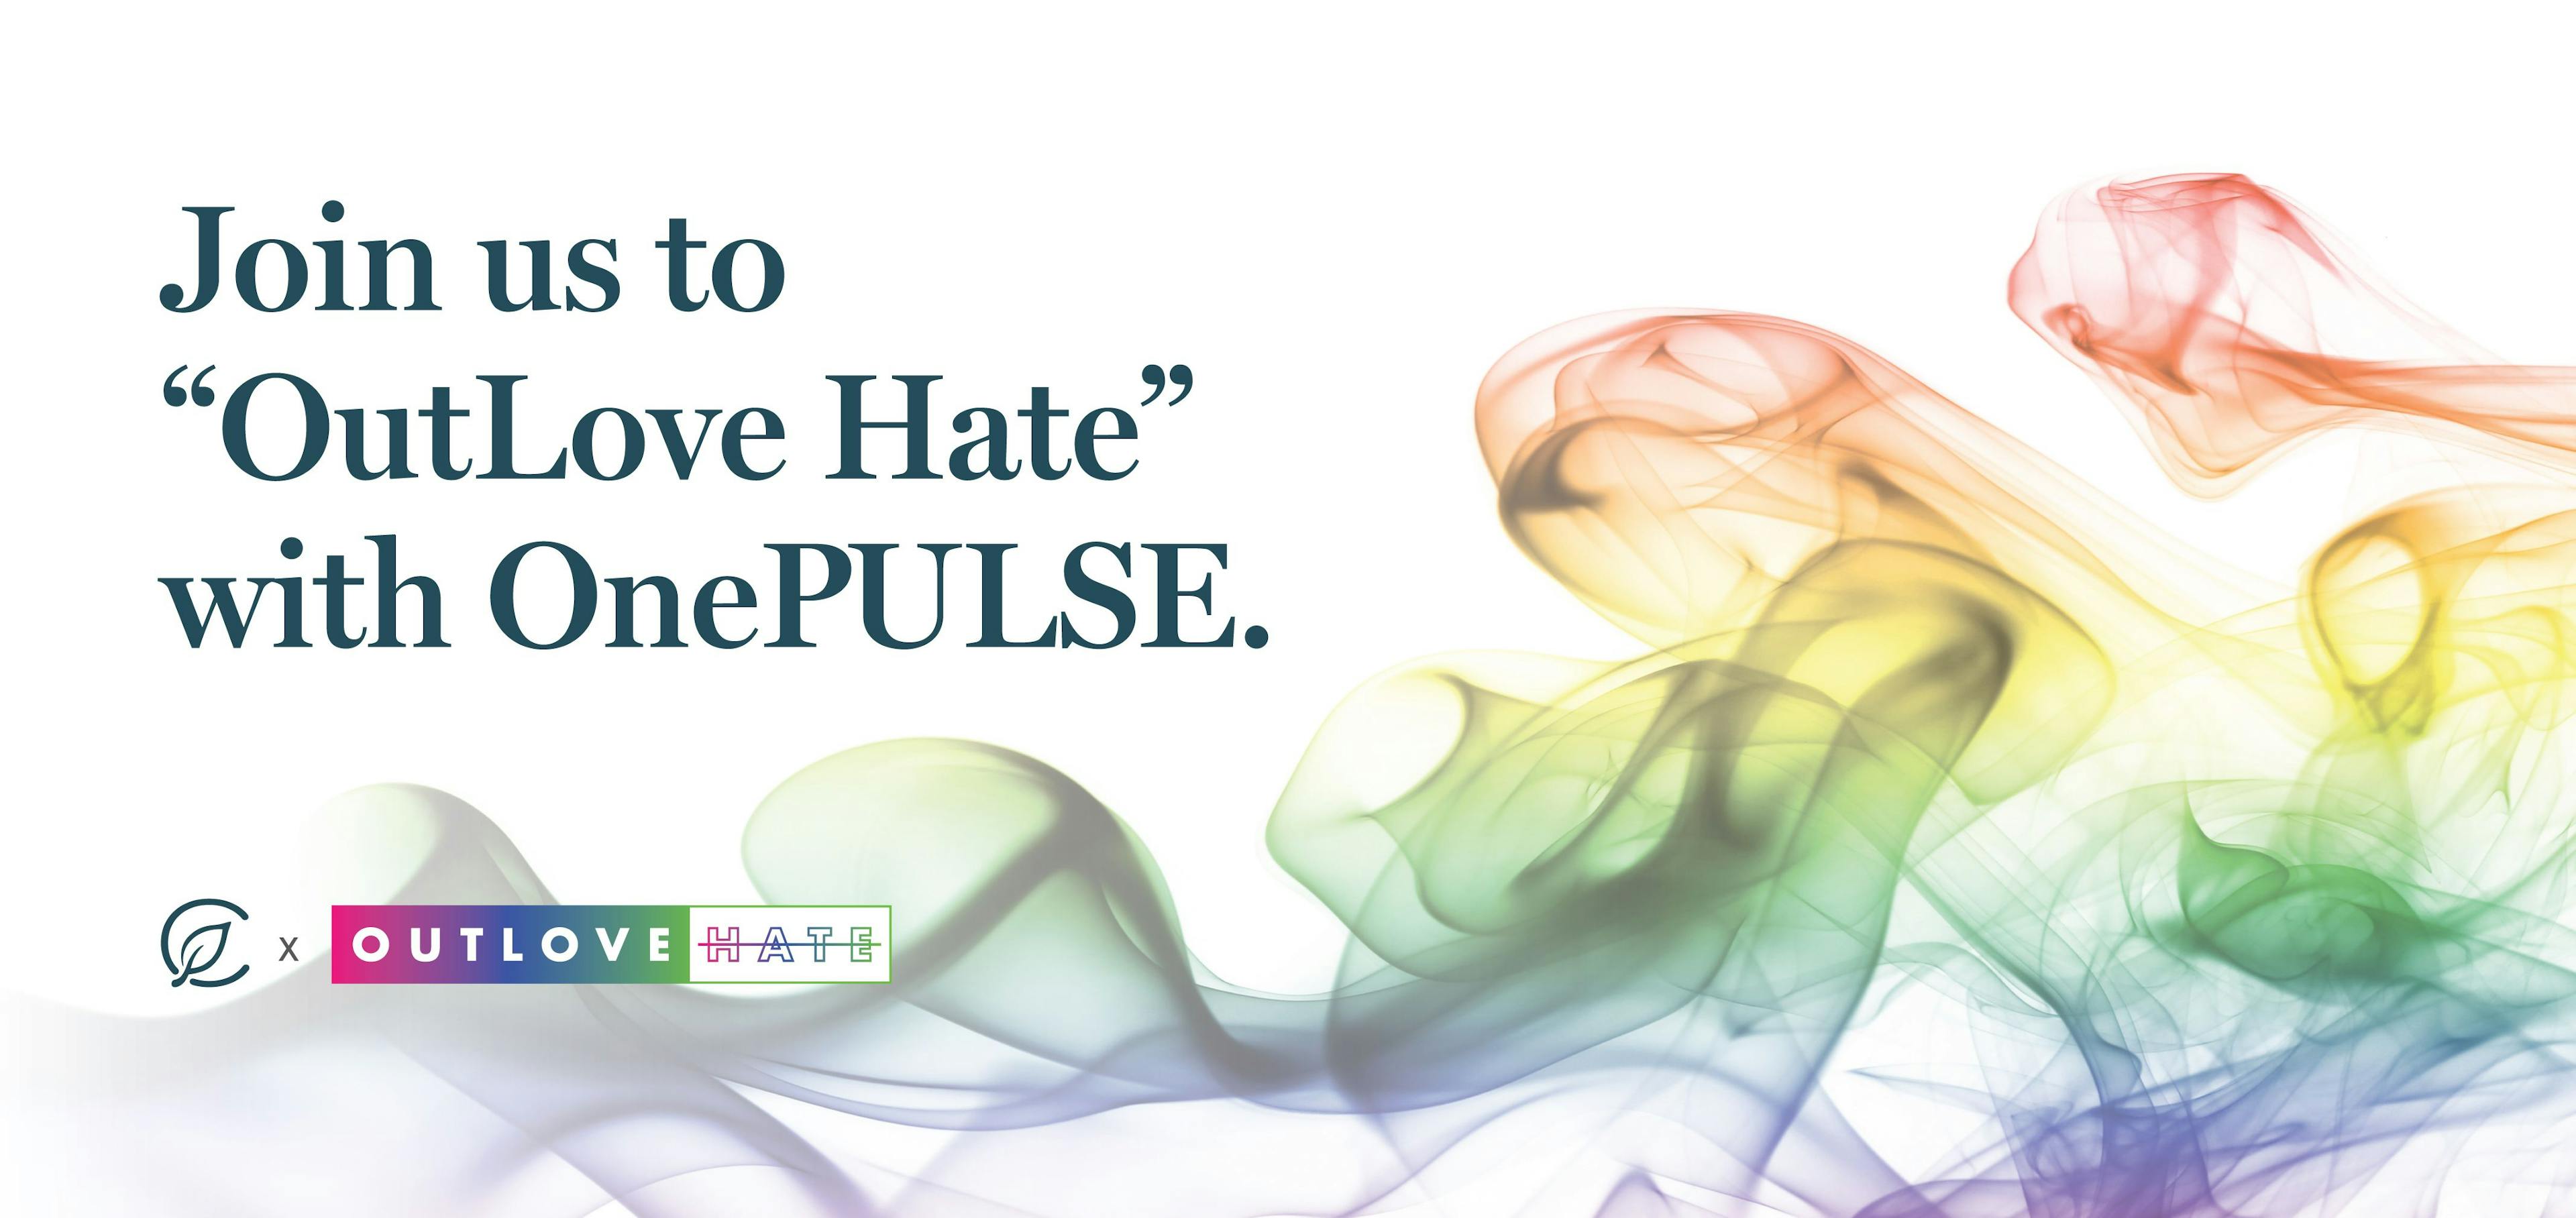 Let’s Out Love Hate Together with OnePULSE